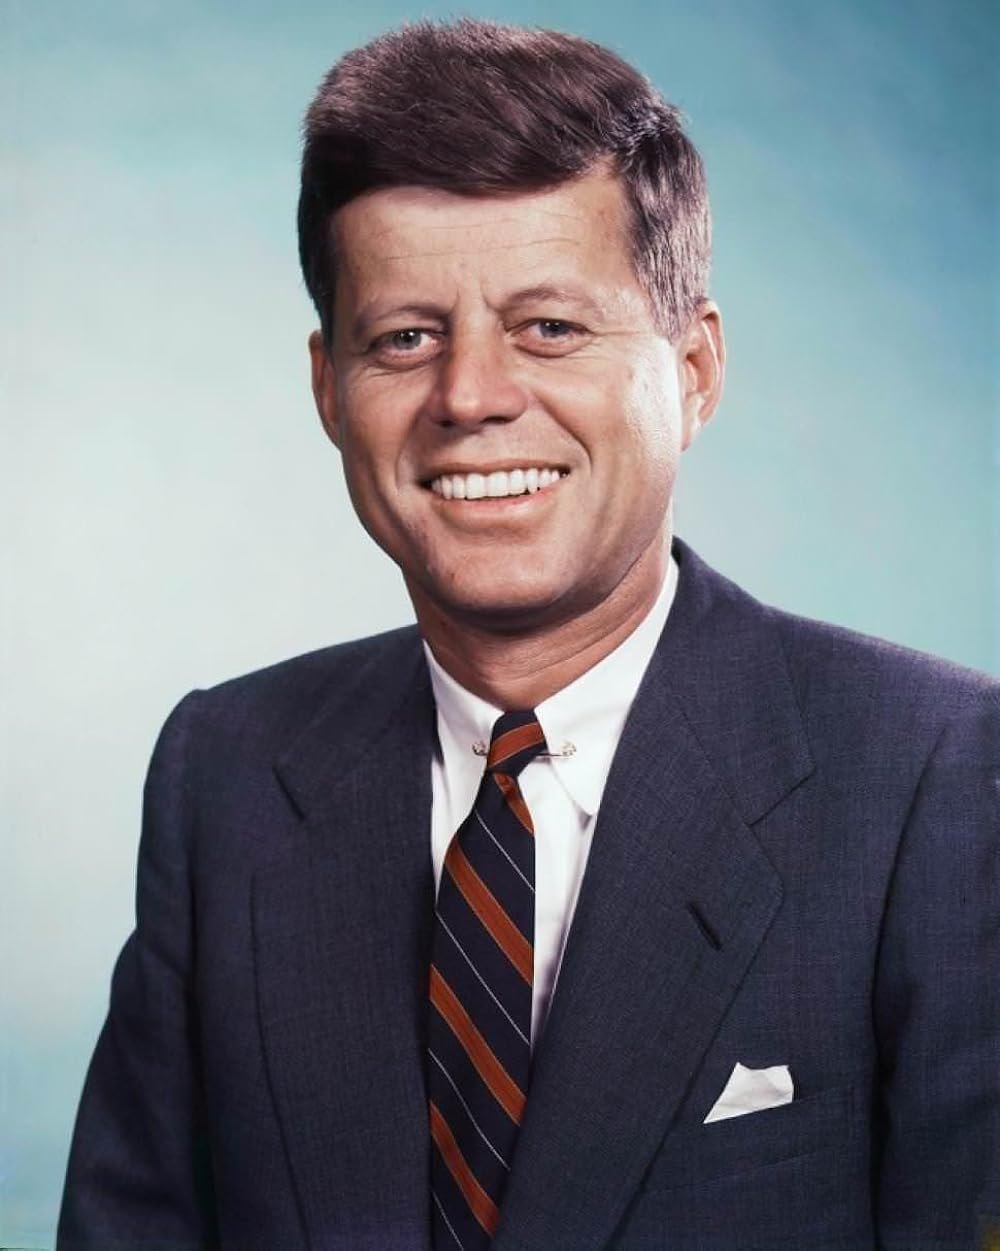 John F. Kennedy’s Assassination, who killed him and why?